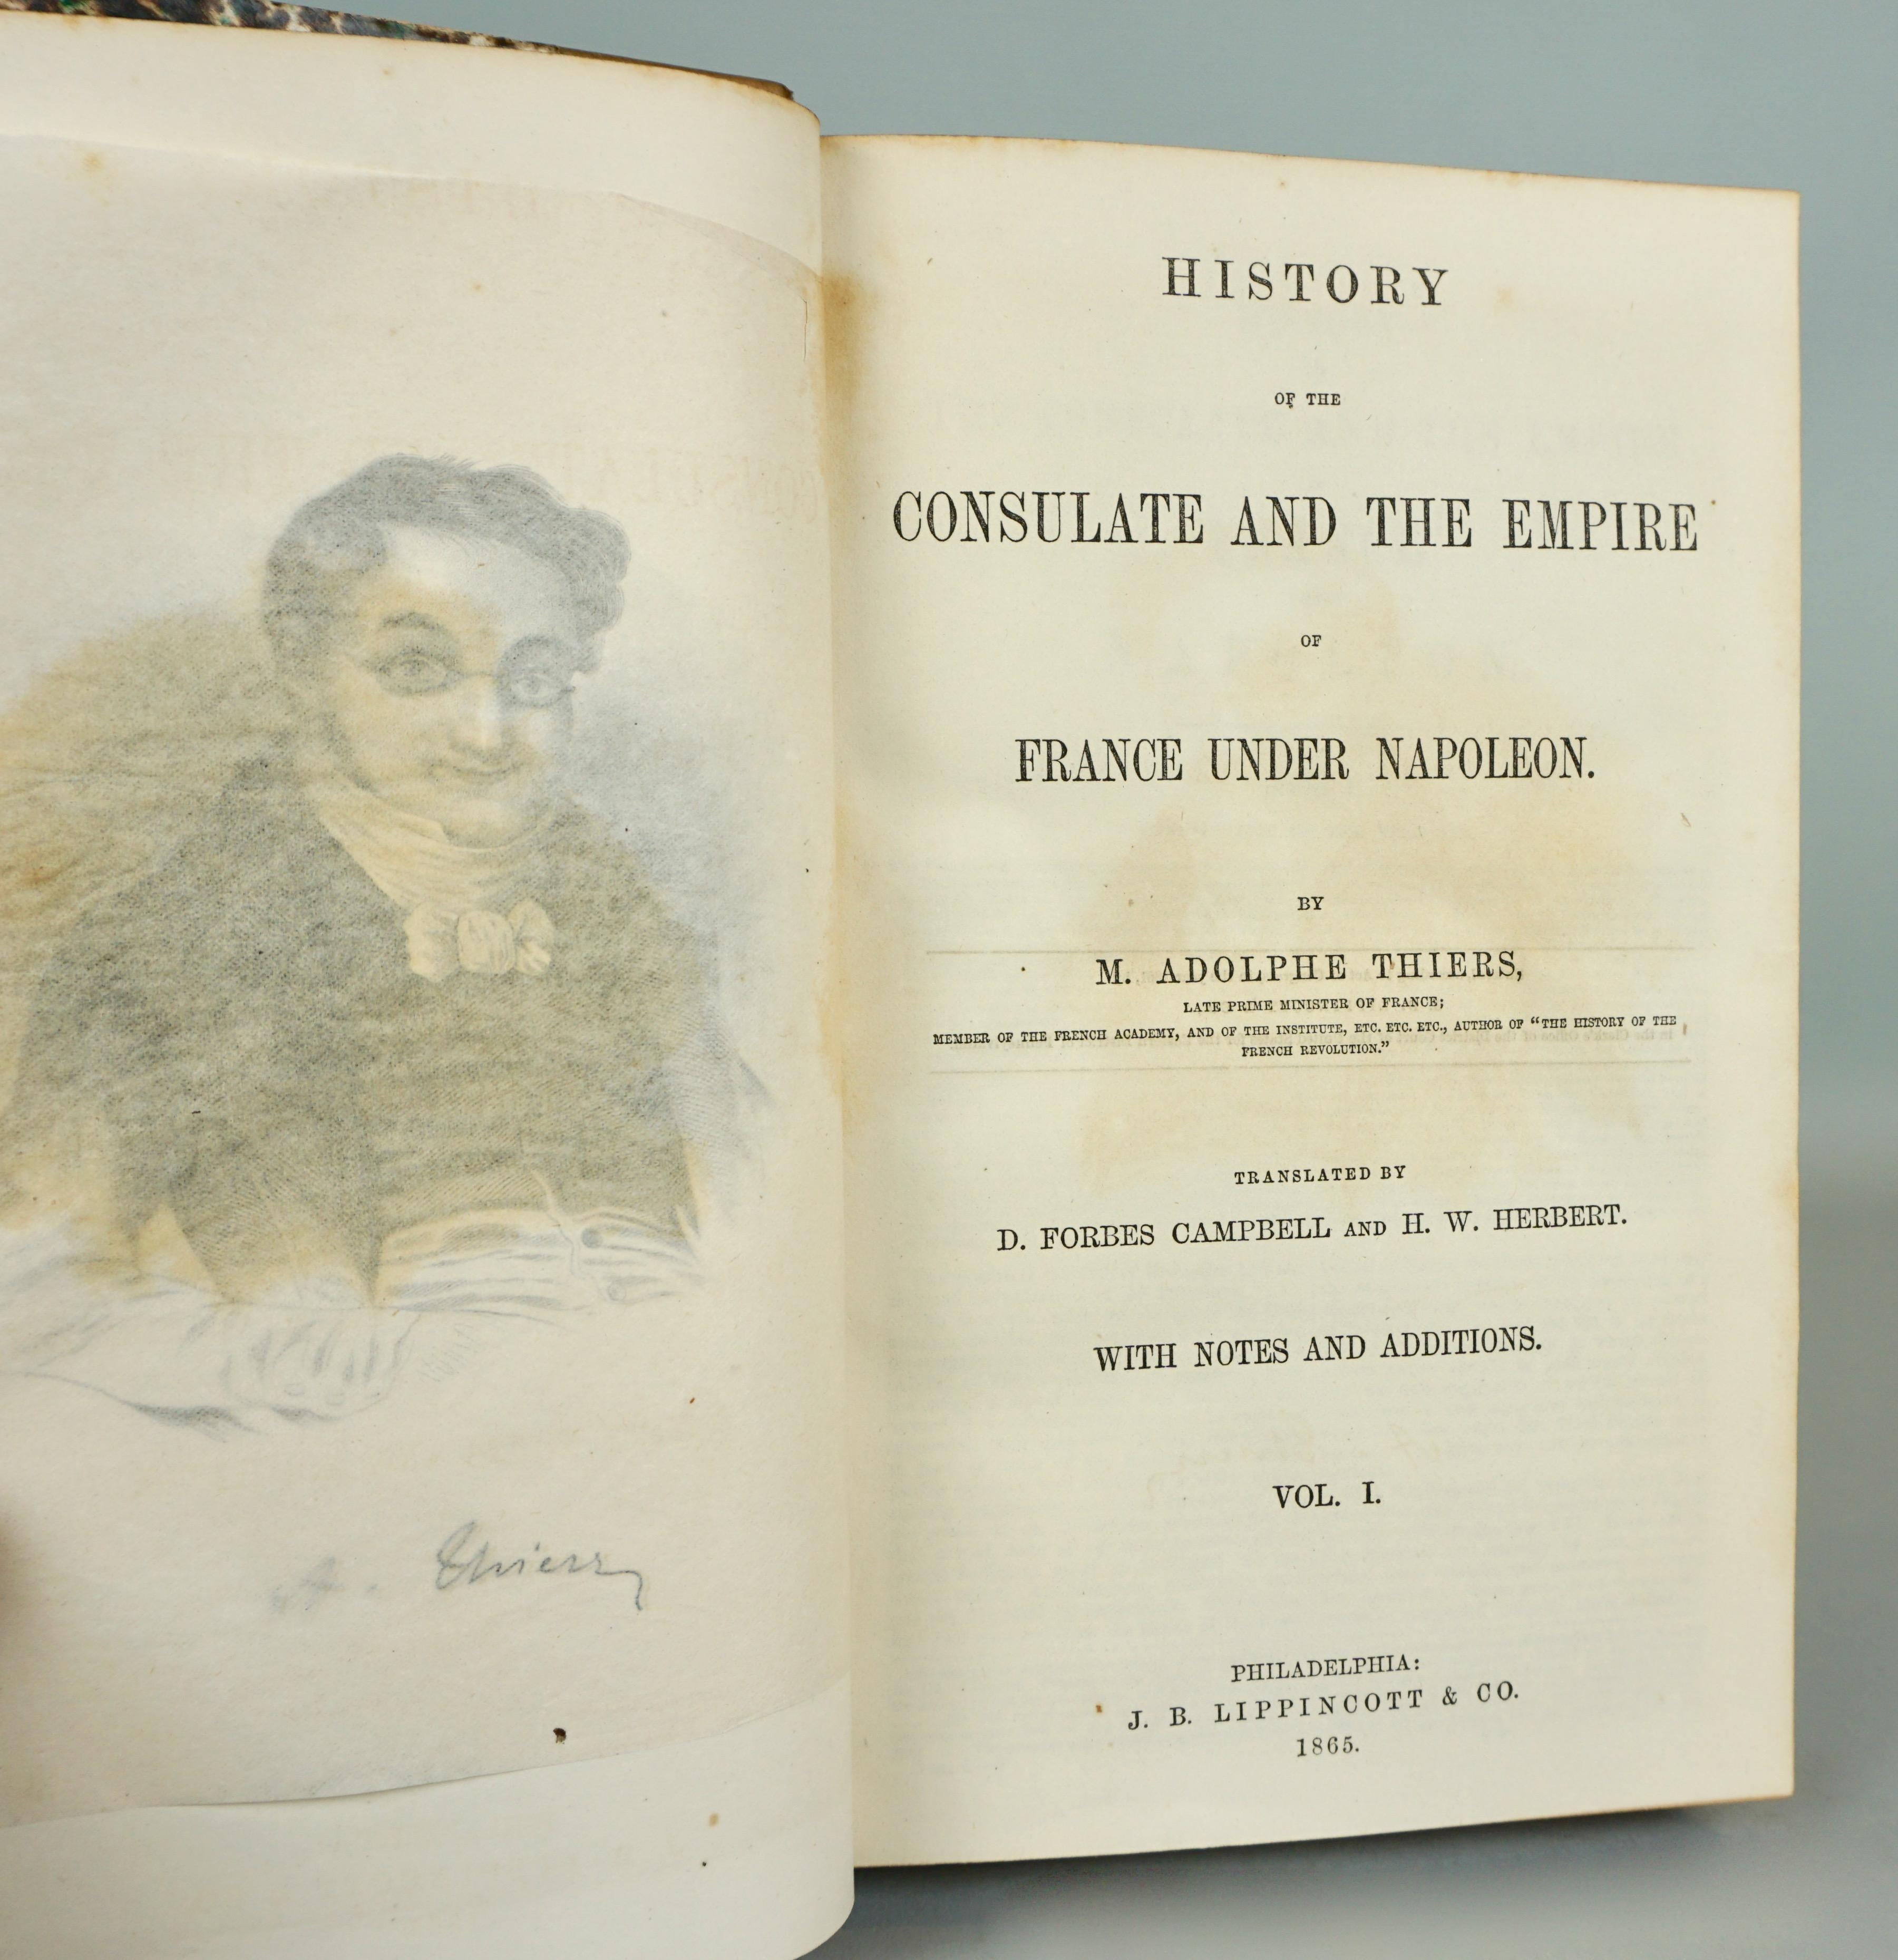 A 5 volume history of the French Consulate and Empire under Napoleon written by famous historian and later French President Adolphe Thiers, in 3/4 brown leather bound volumes with raised gilt tooled spines, marbleized endpapers and boards and